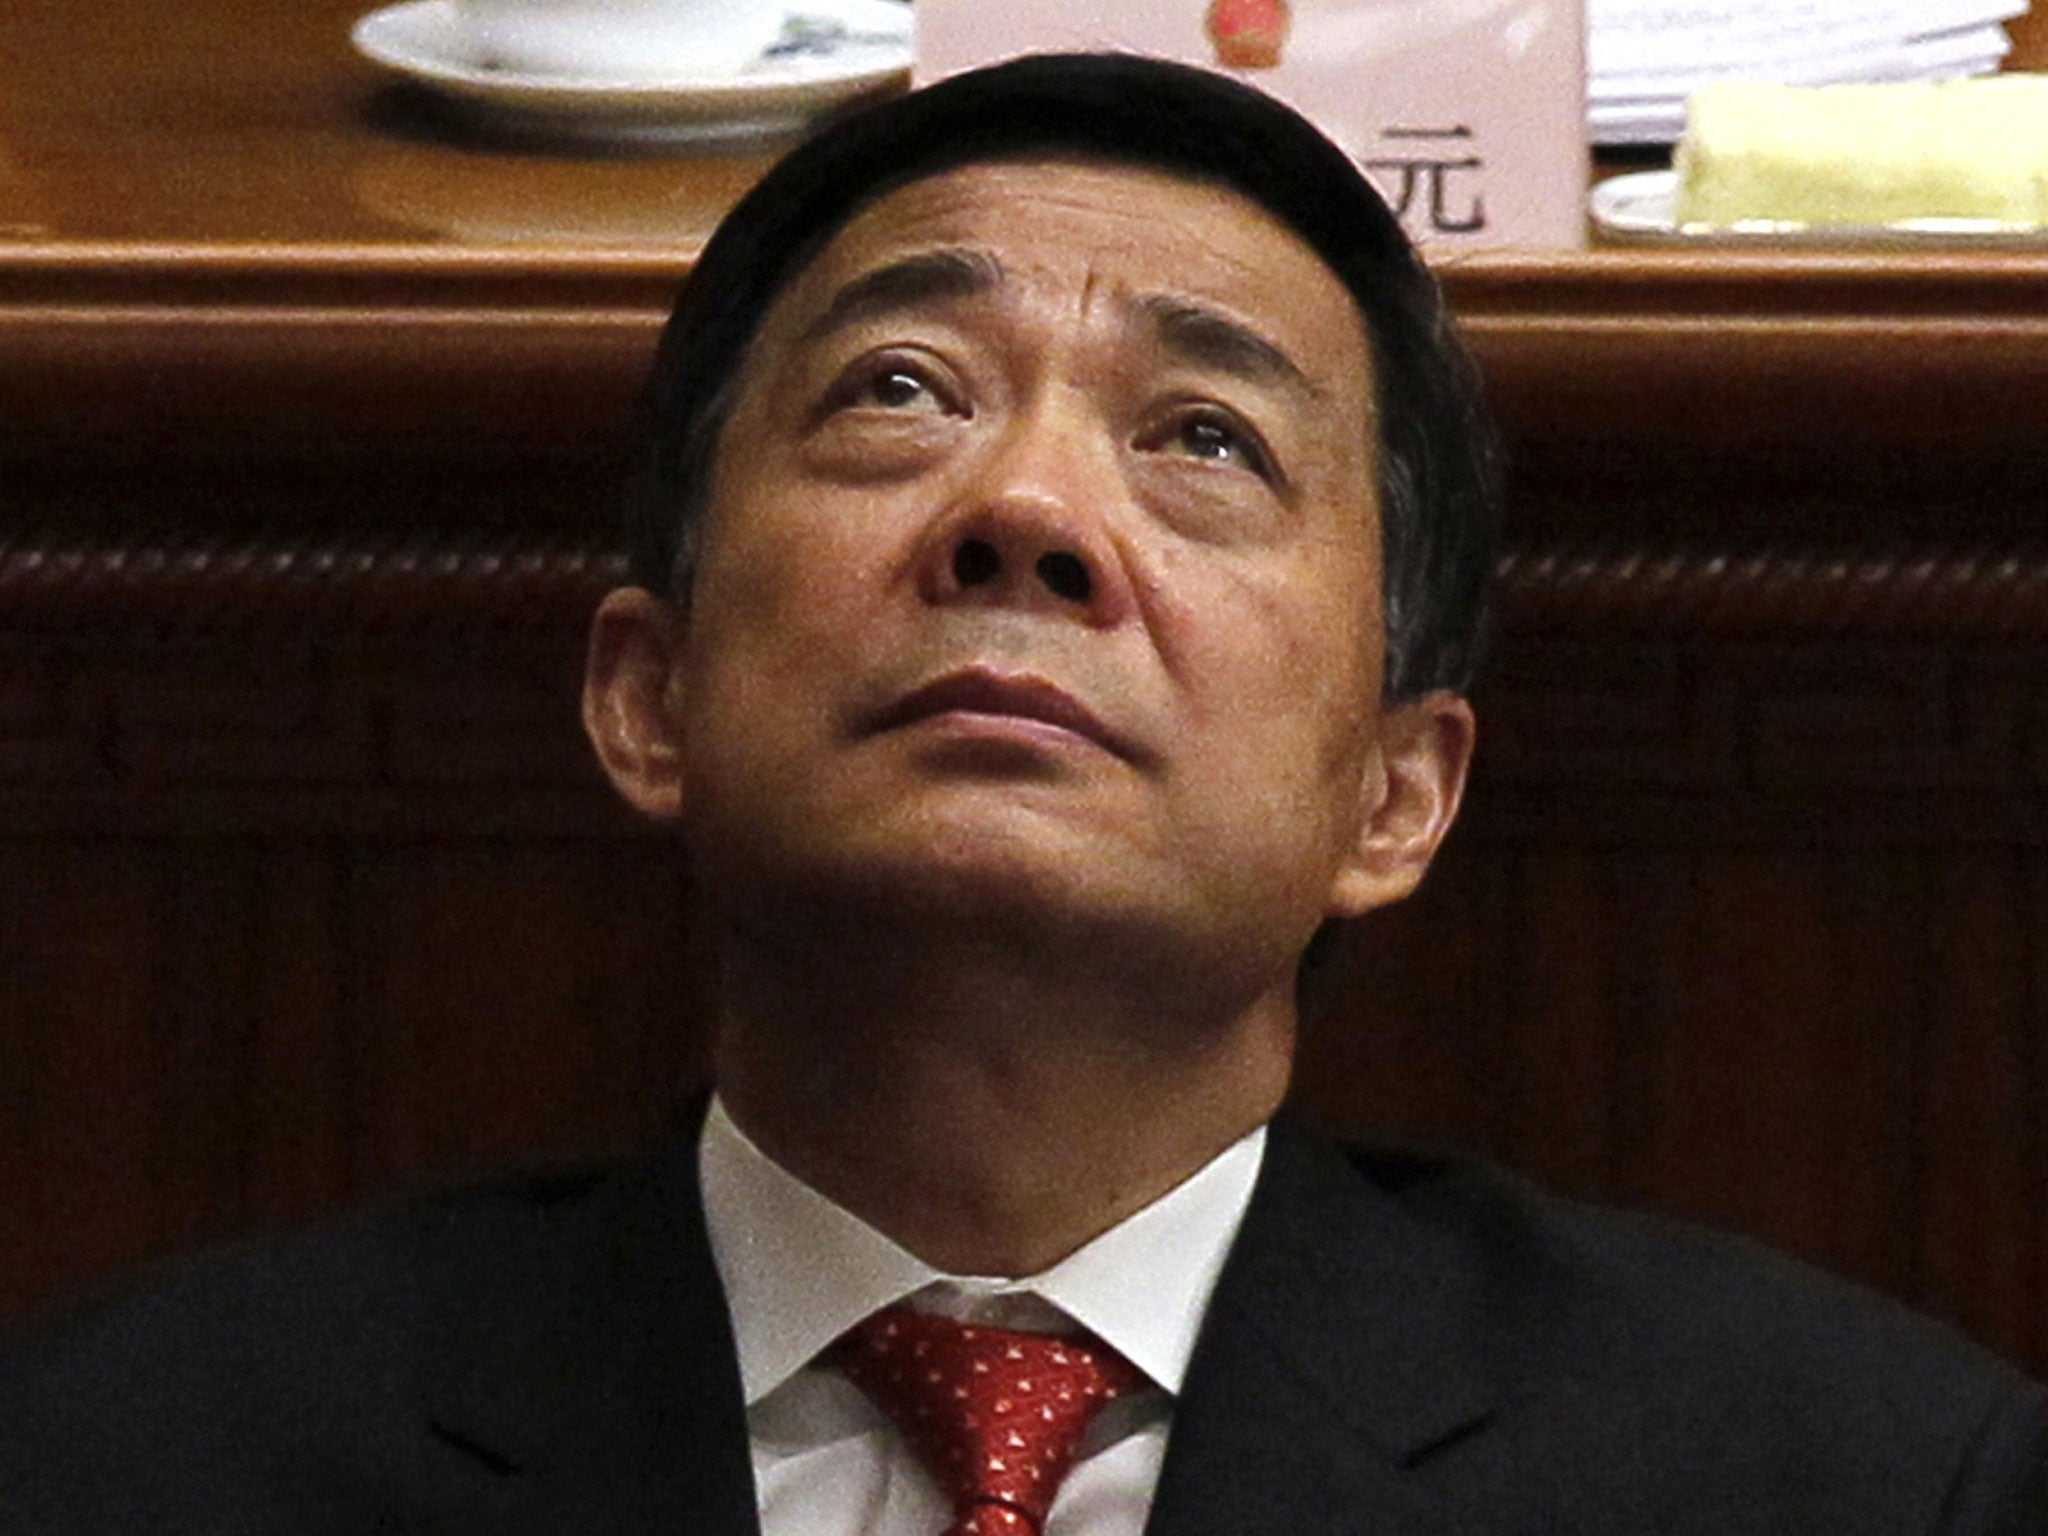 Bo Xilai's trial is an early test of President Xi Jinping's campaign to stamp out corruption